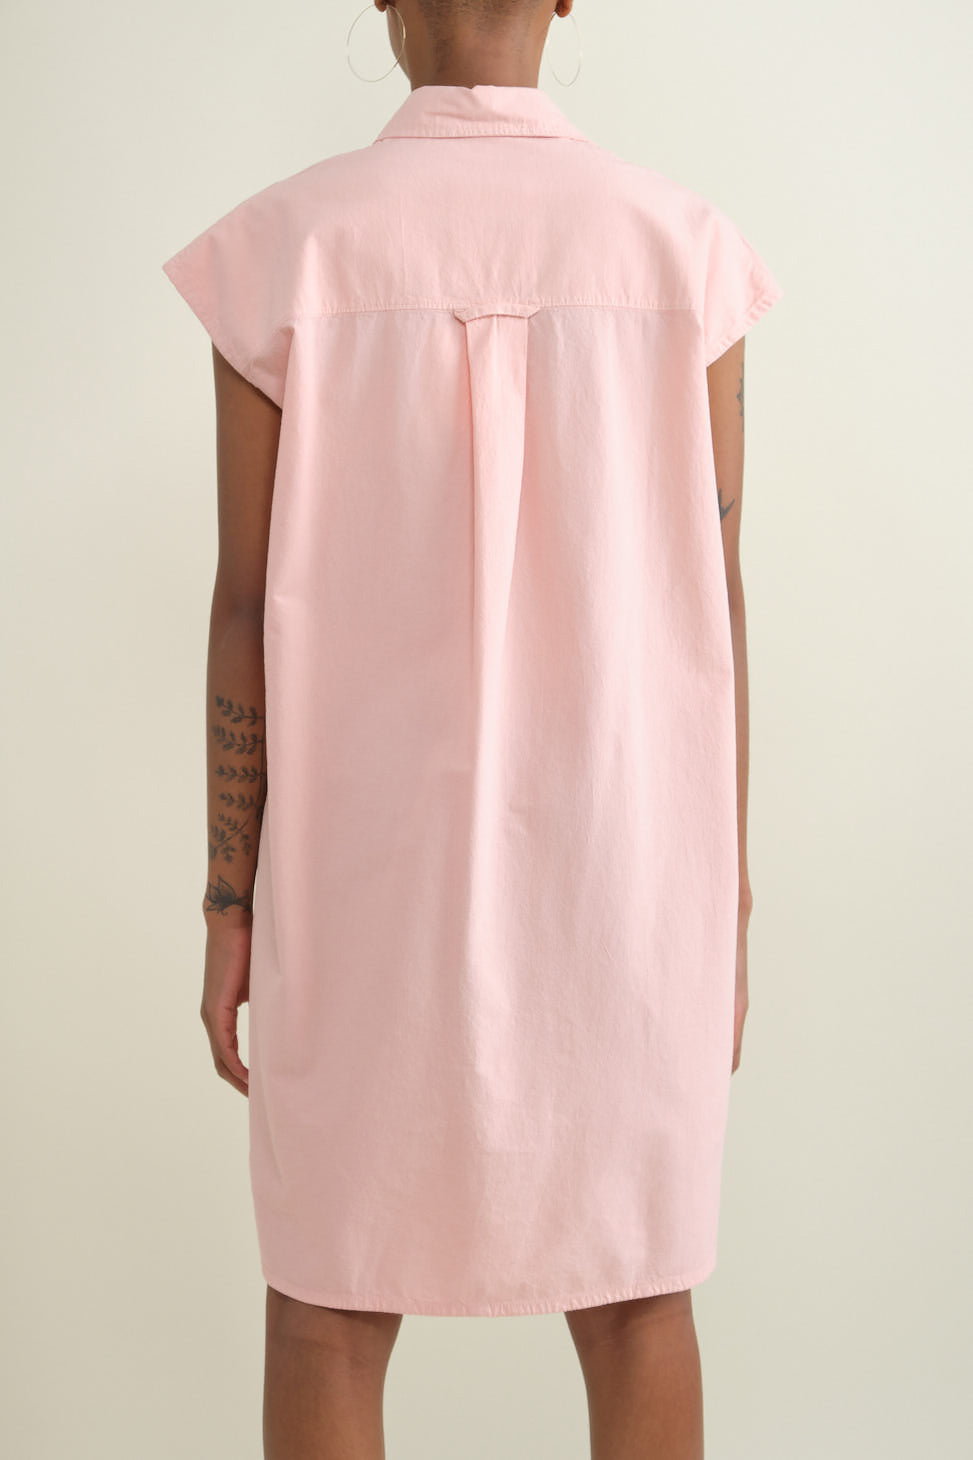 Back of Sleeveless Shirt in Pink